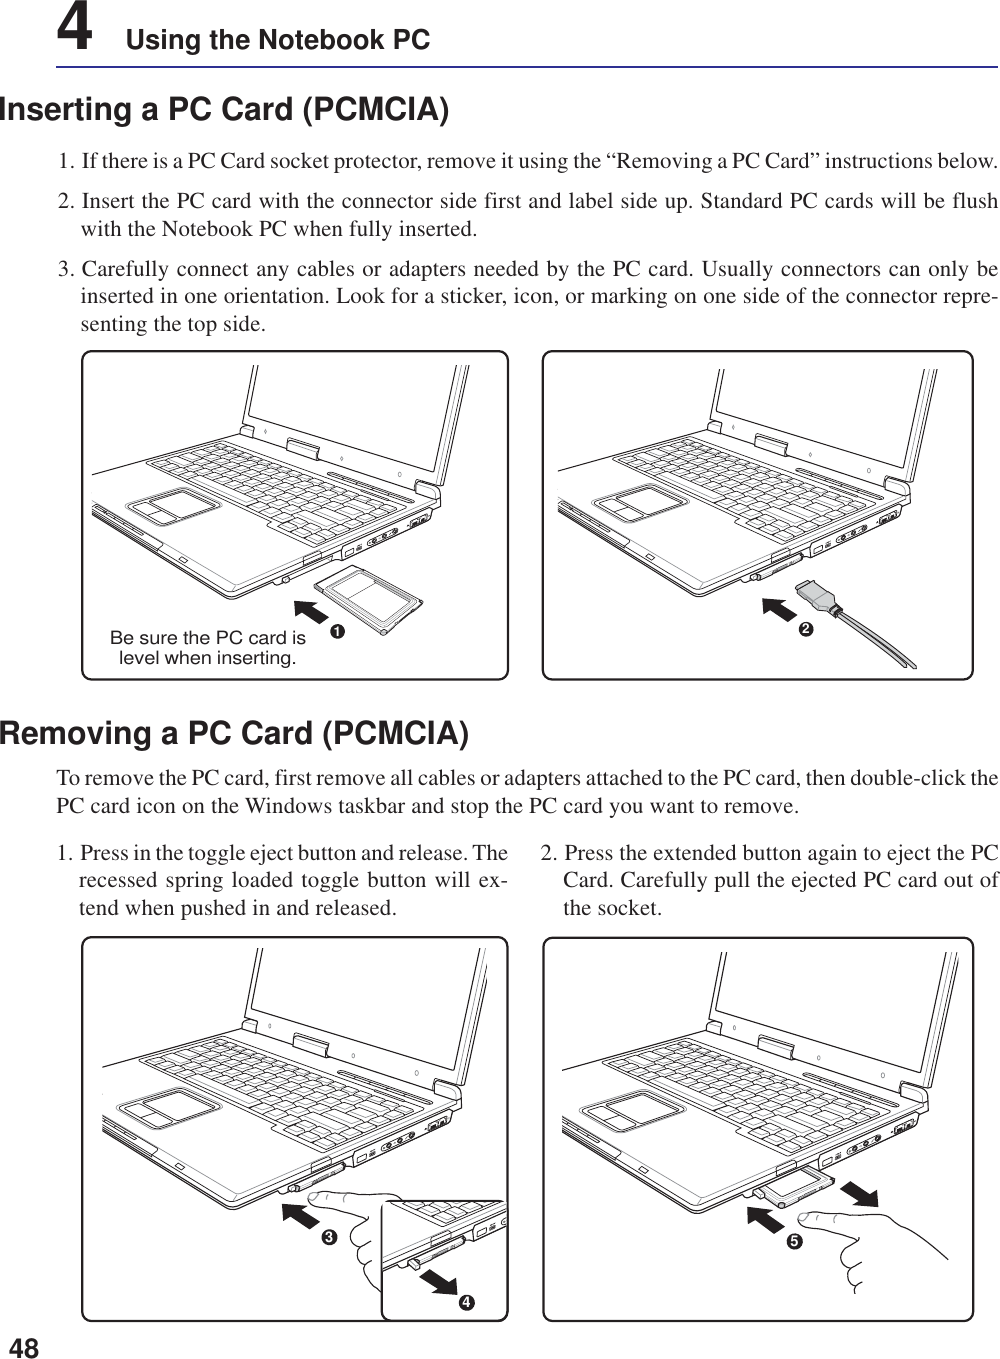 484    Using the Notebook PCInserting a PC Card (PCMCIA)1. If there is a PC Card socket protector, remove it using the “Removing a PC Card” instructions below.2. Insert the PC card with the connector side first and label side up. Standard PC cards will be flushwith the Notebook PC when fully inserted.3. Carefully connect any cables or adapters needed by the PC card. Usually connectors can only beinserted in one orientation. Look for a sticker, icon, or marking on one side of the connector repre-senting the top side.1. Press in the toggle eject button and release. Therecessed spring loaded toggle button will ex-tend when pushed in and released.2. Press the extended button again to eject the PCCard. Carefully pull the ejected PC card out ofthe socket.Removing a PC Card (PCMCIA)To remove the PC card, first remove all cables or adapters attached to the PC card, then double-click thePC card icon on the Windows taskbar and stop the PC card you want to remove.5341Be sure the PC card islevel when inserting.2